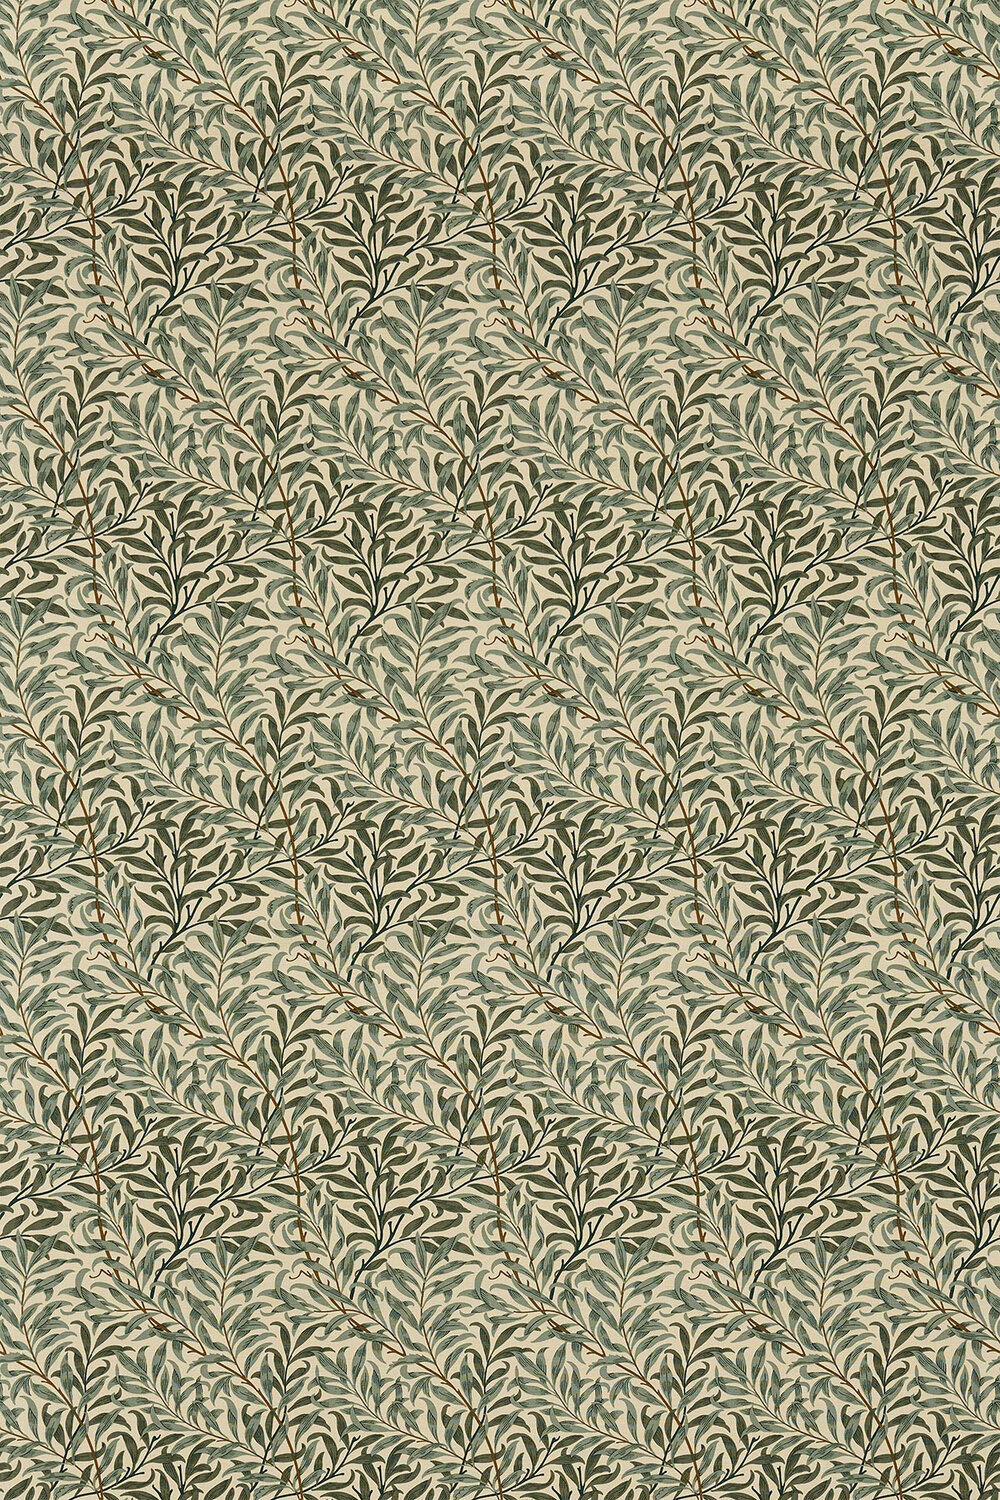 Willow Bough Fabric - Cream / Green - by Morris